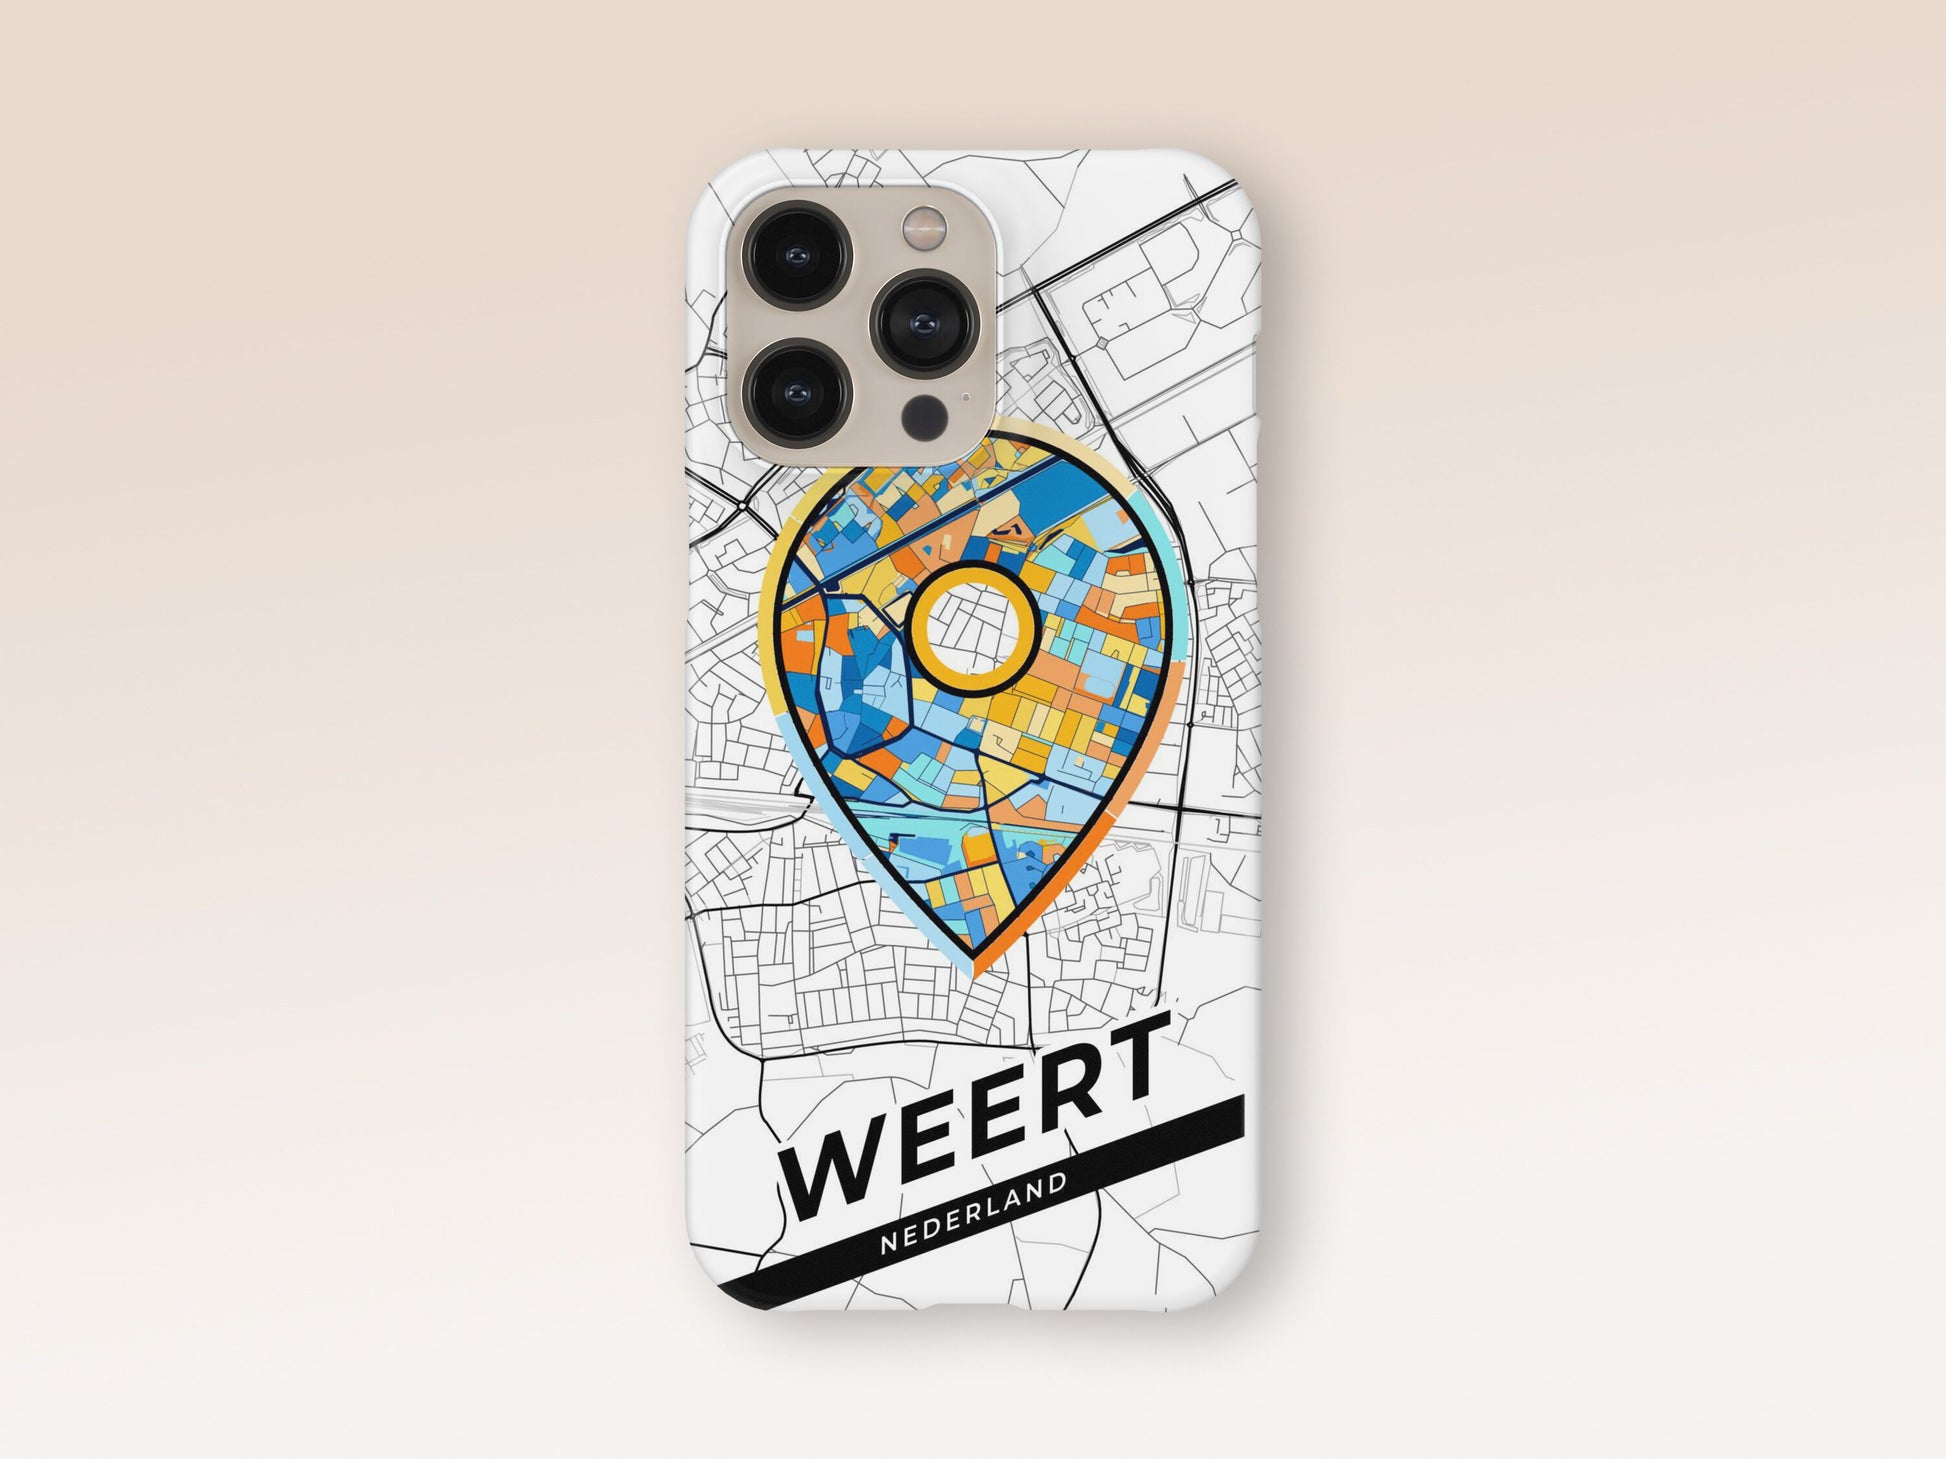 Weert Netherlands slim phone case with colorful icon 1